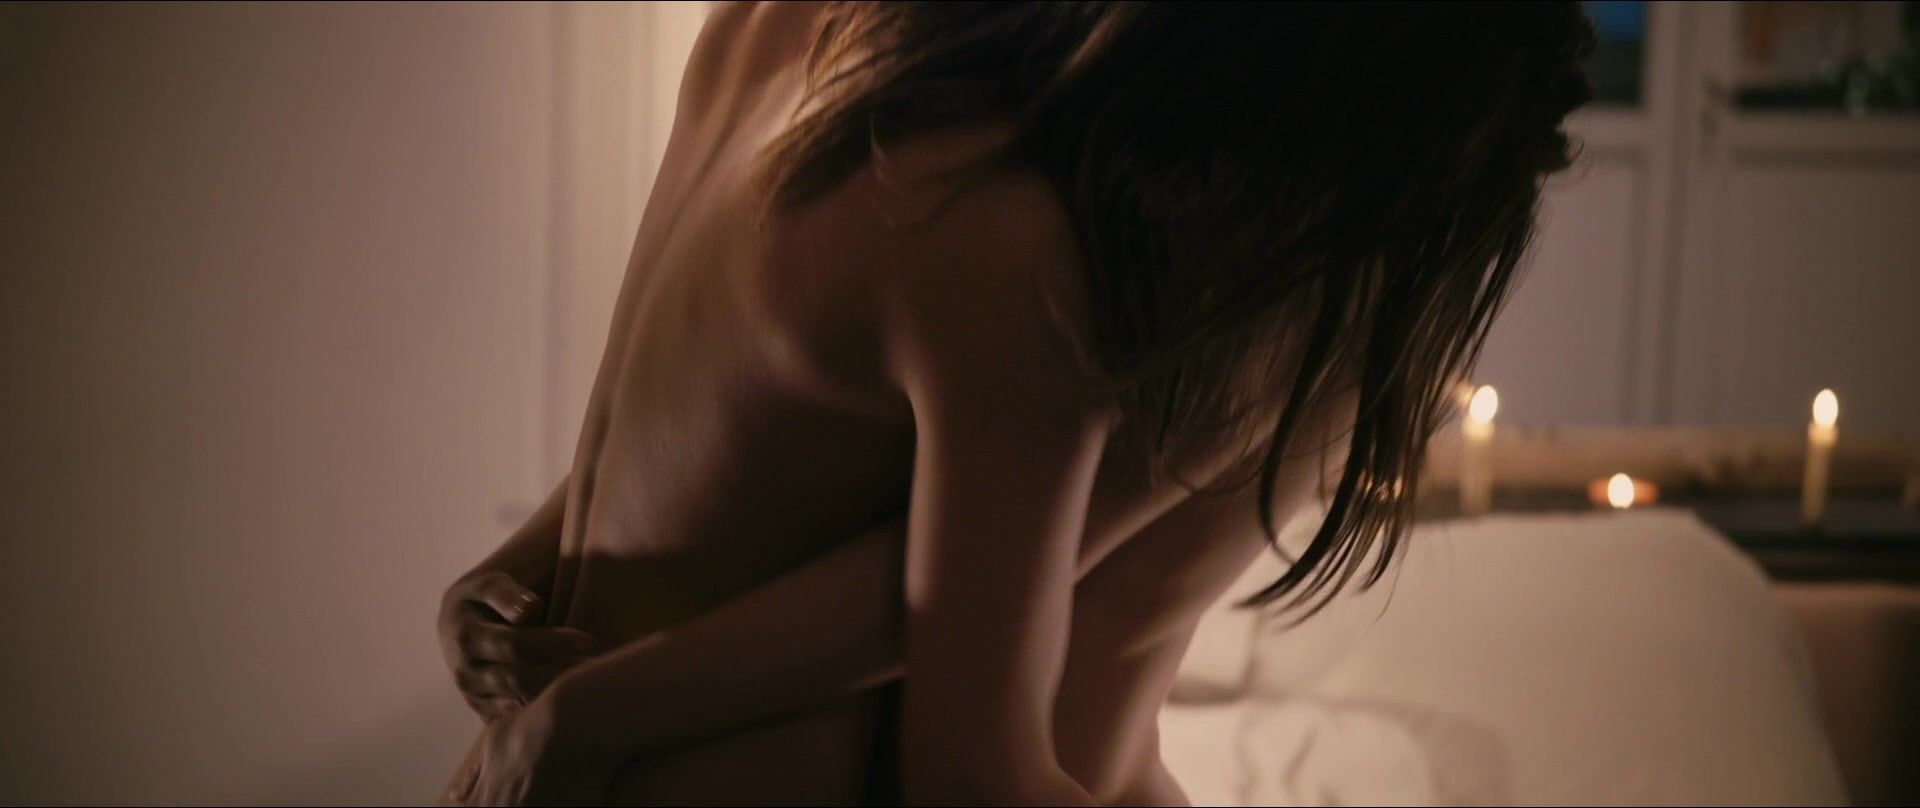 Doctor Best lesbian scene in movies | Adele Exarchopoulos nude & Léa Seydoux naked | The film "Blue Is The Warmest Color" (2013) Exgf